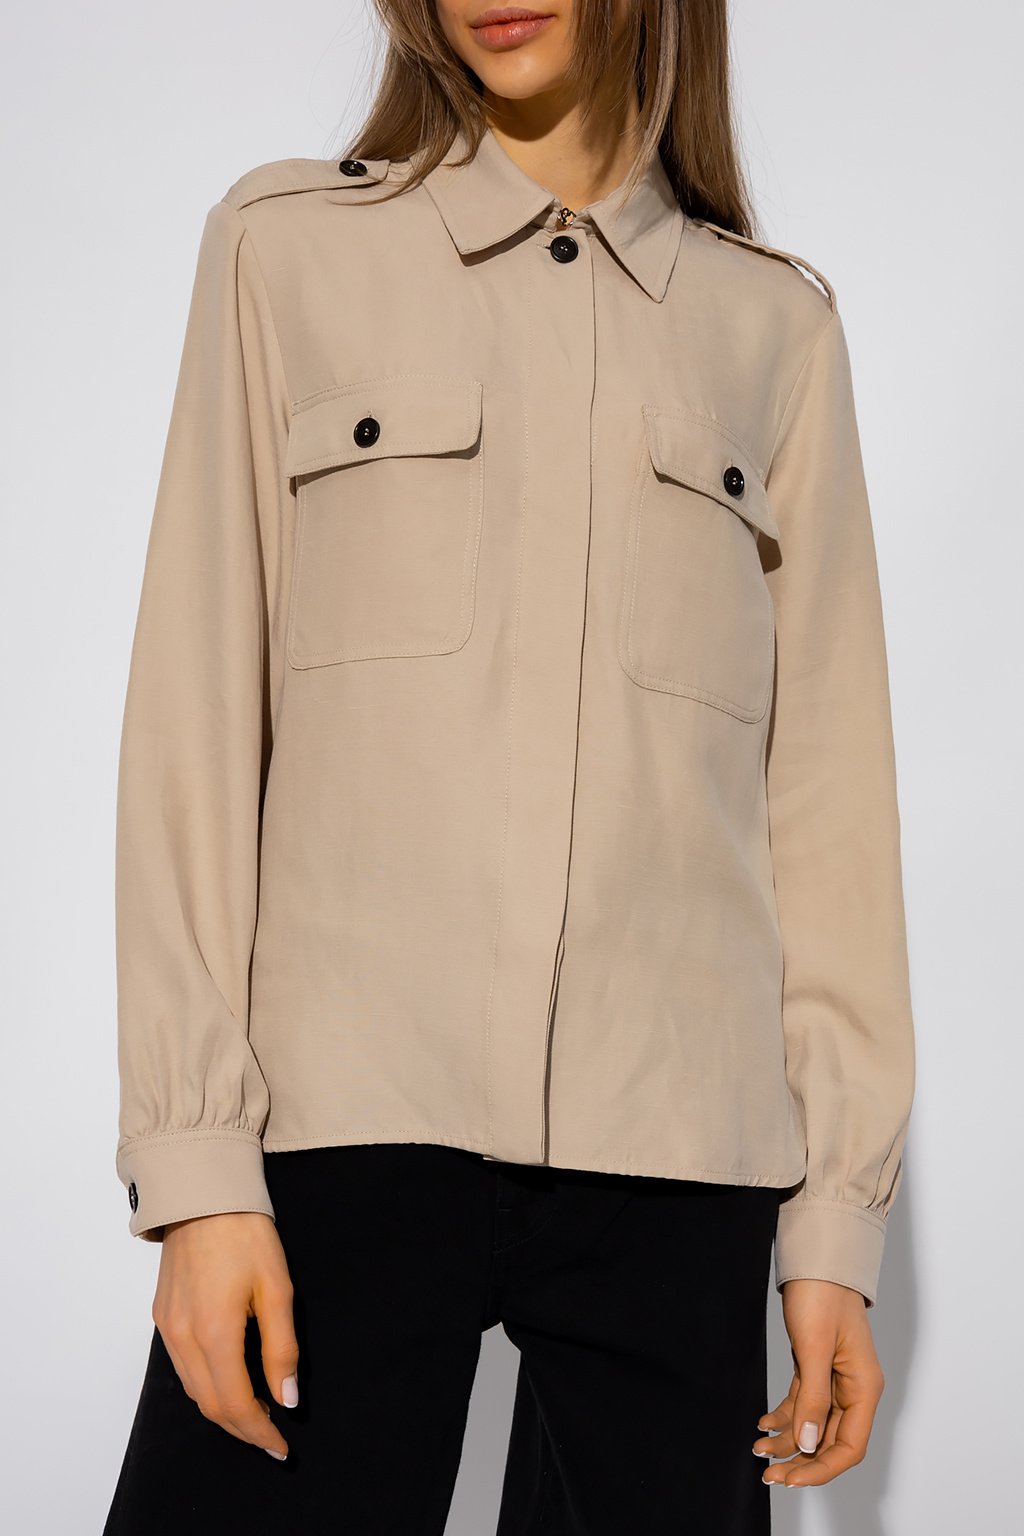 Woolrich Shirt with epaulettes